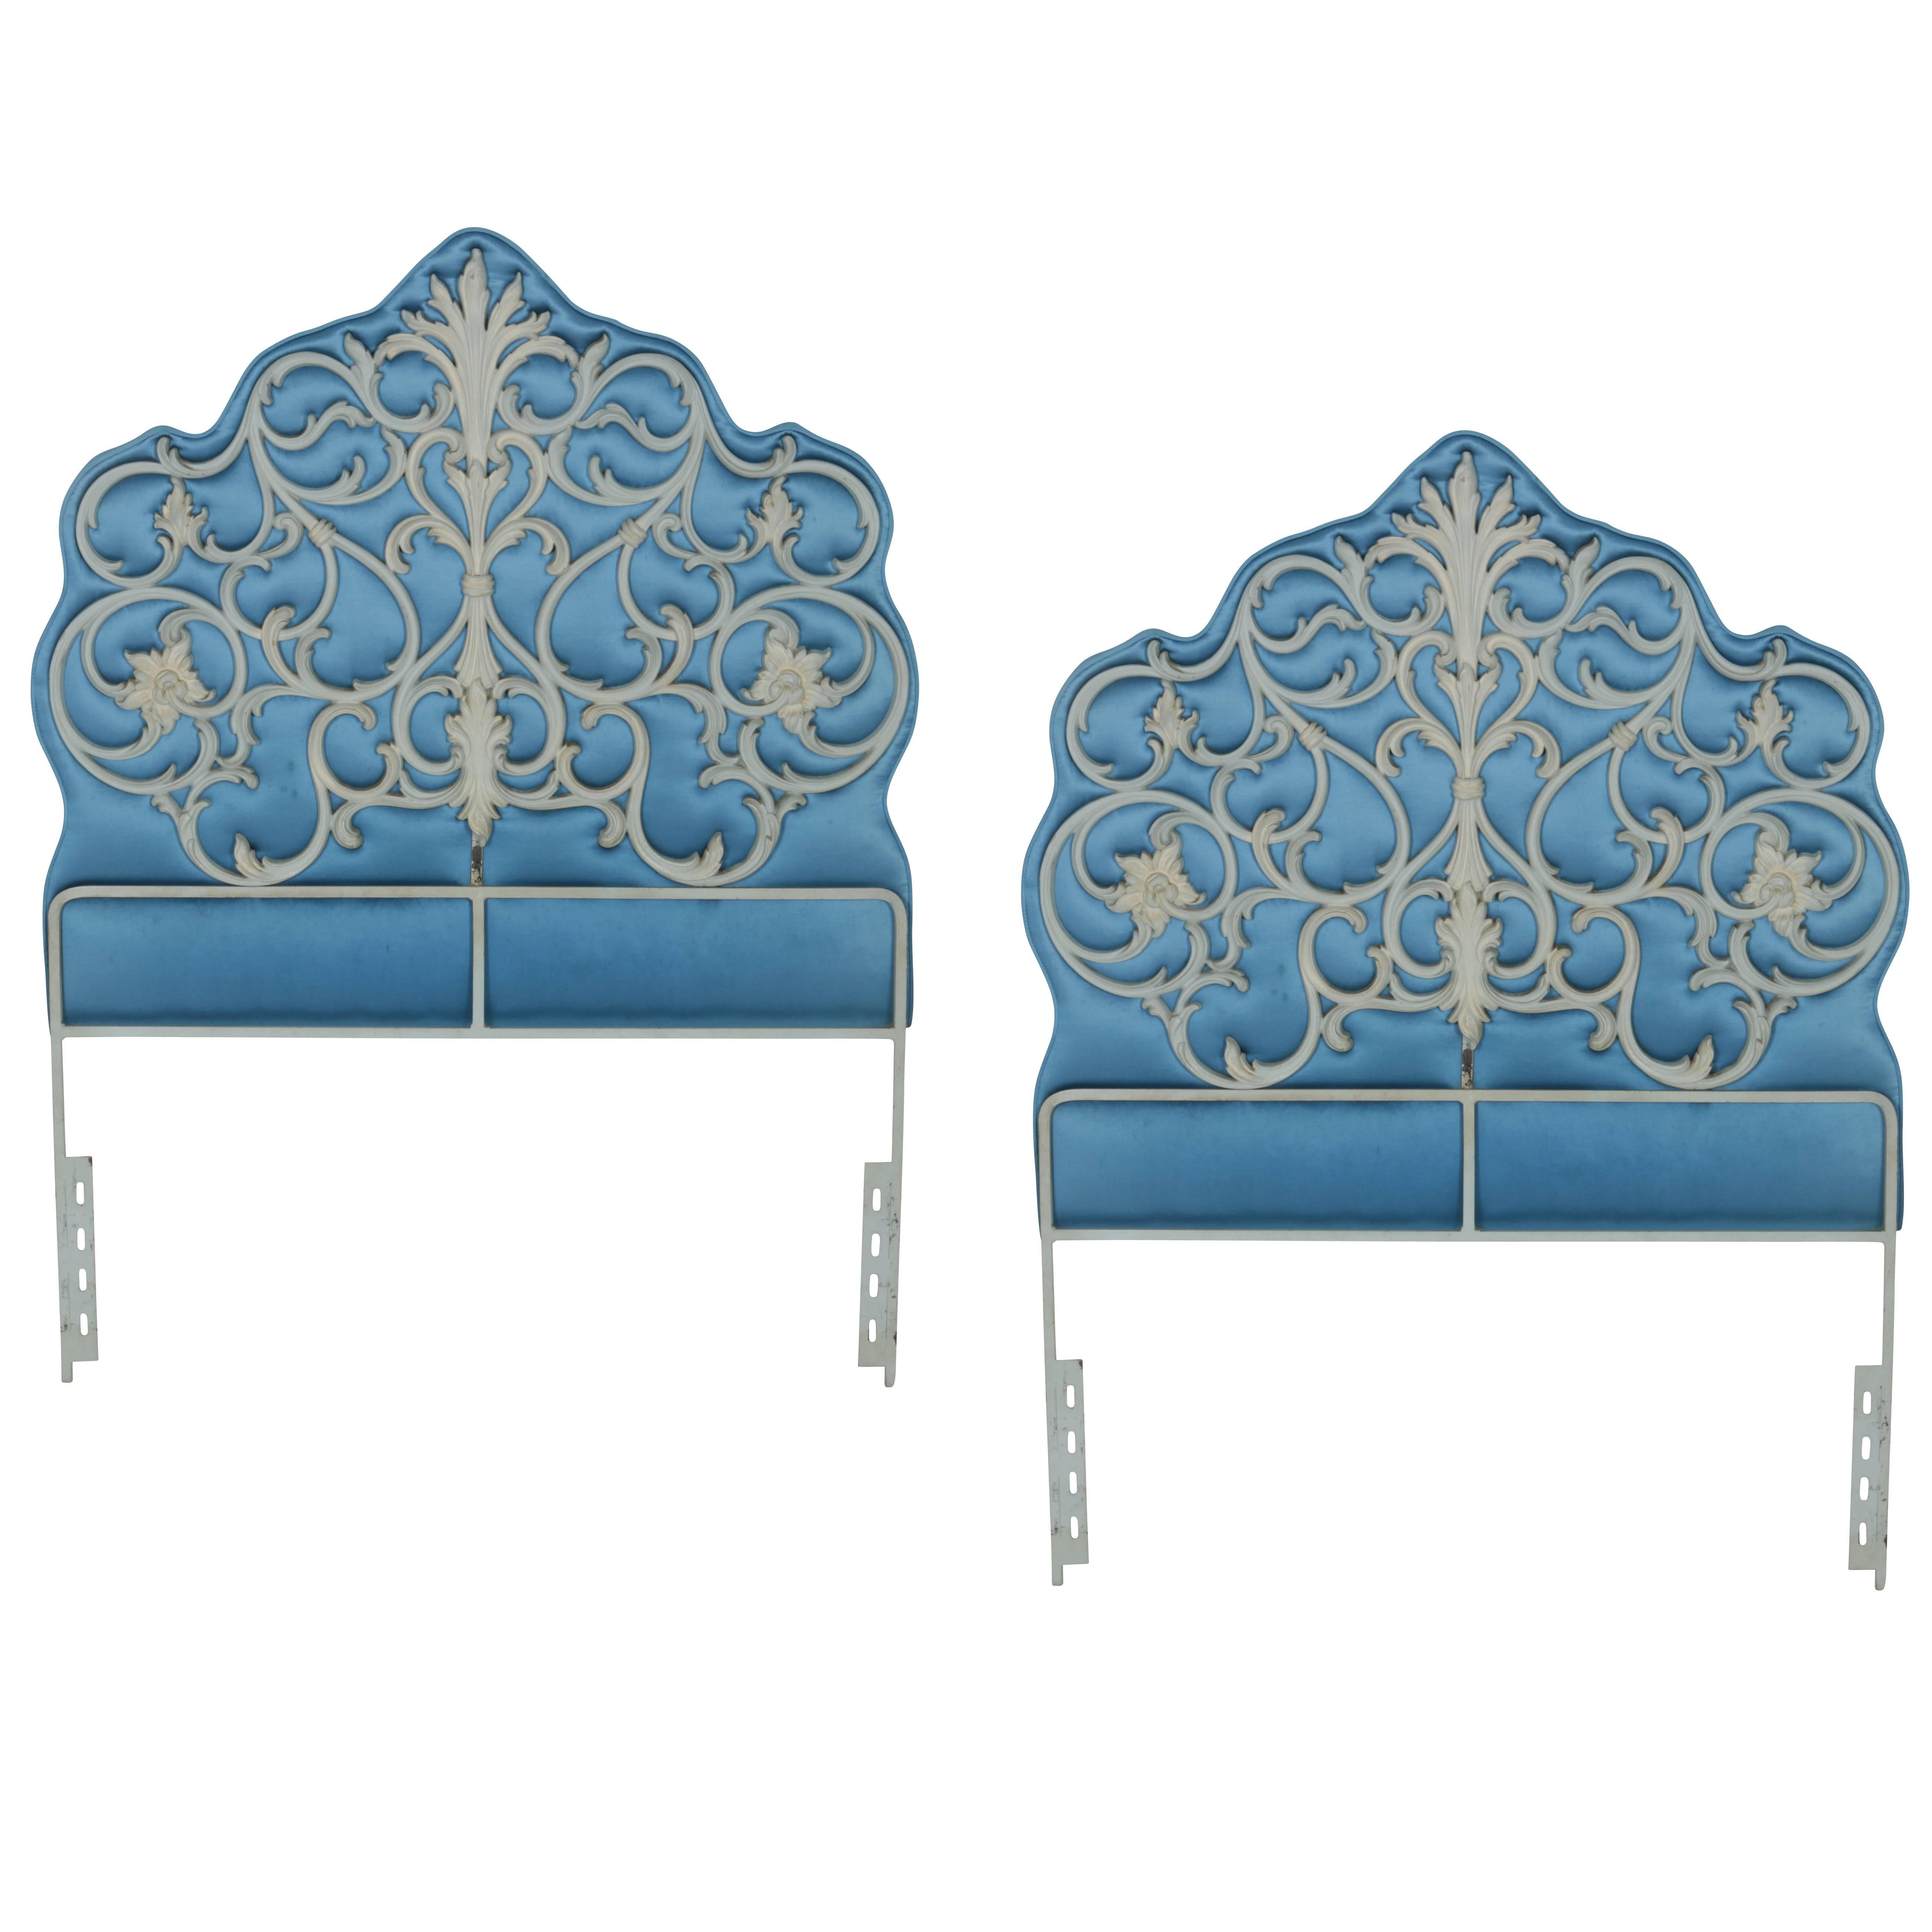 Pair of French Regency-Style Padded Silk and Iron Headboards